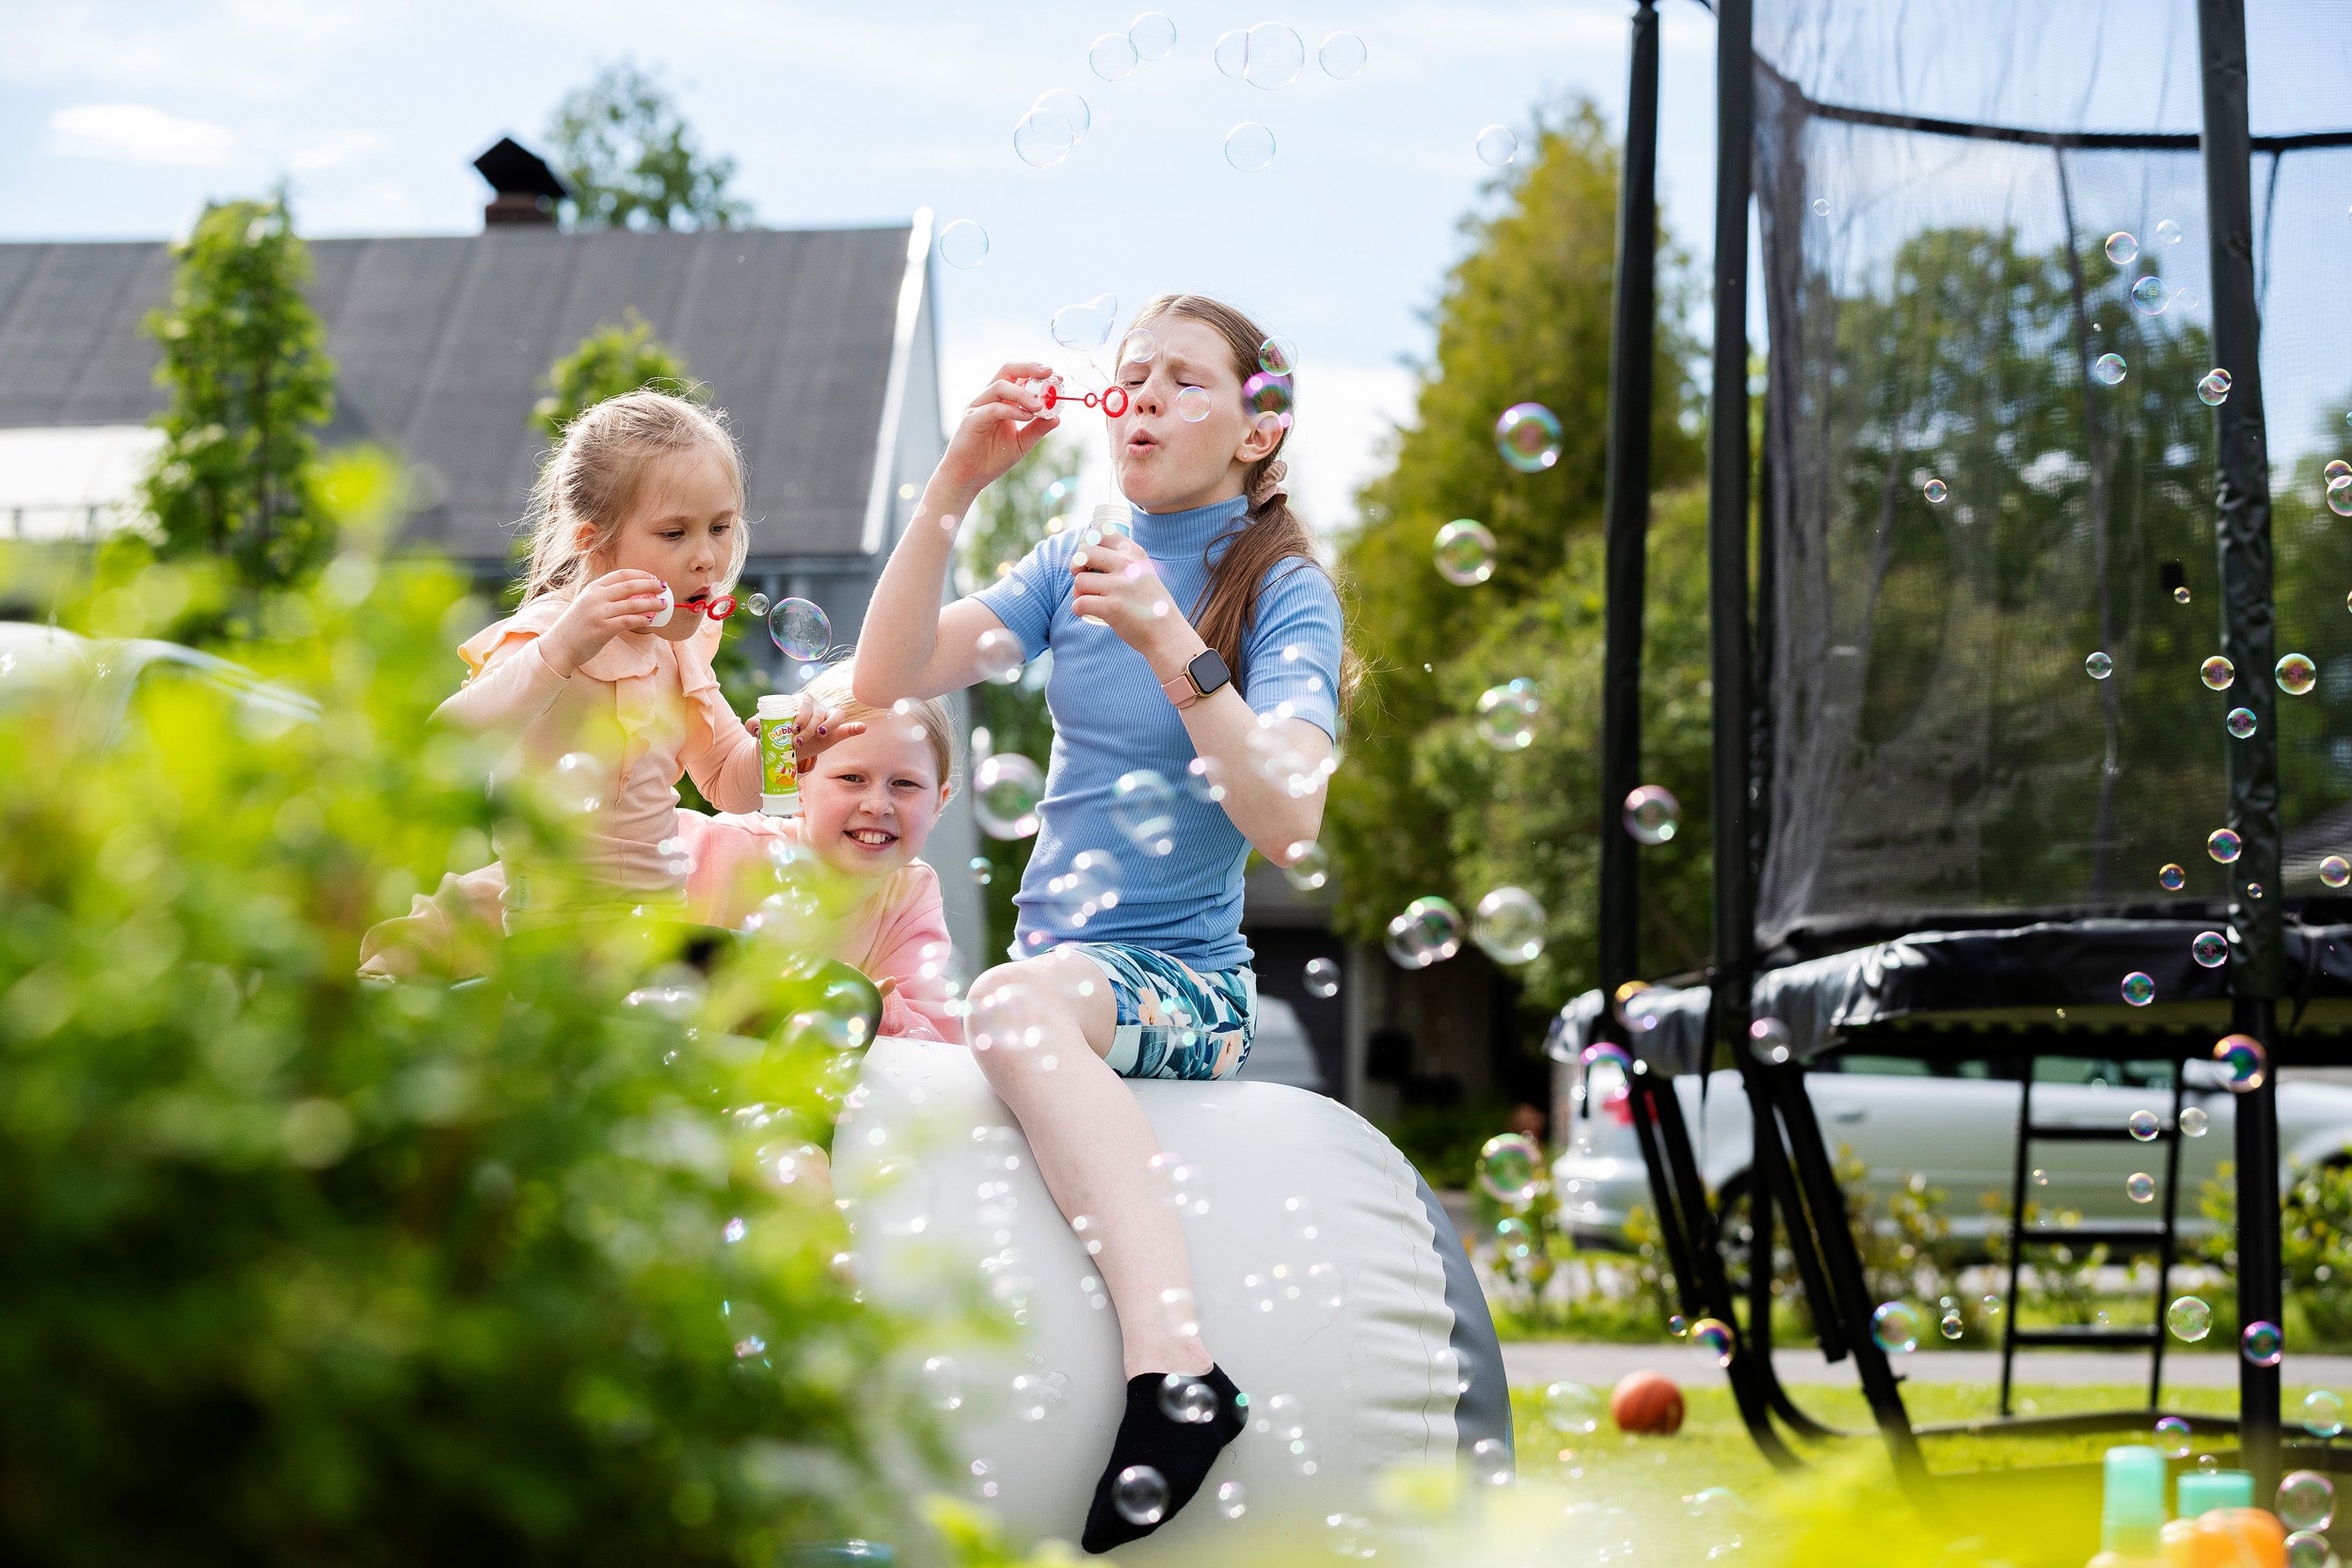 Kids blowing soap bubbles on an Airroll. Behind there is a garden and a trampoline.